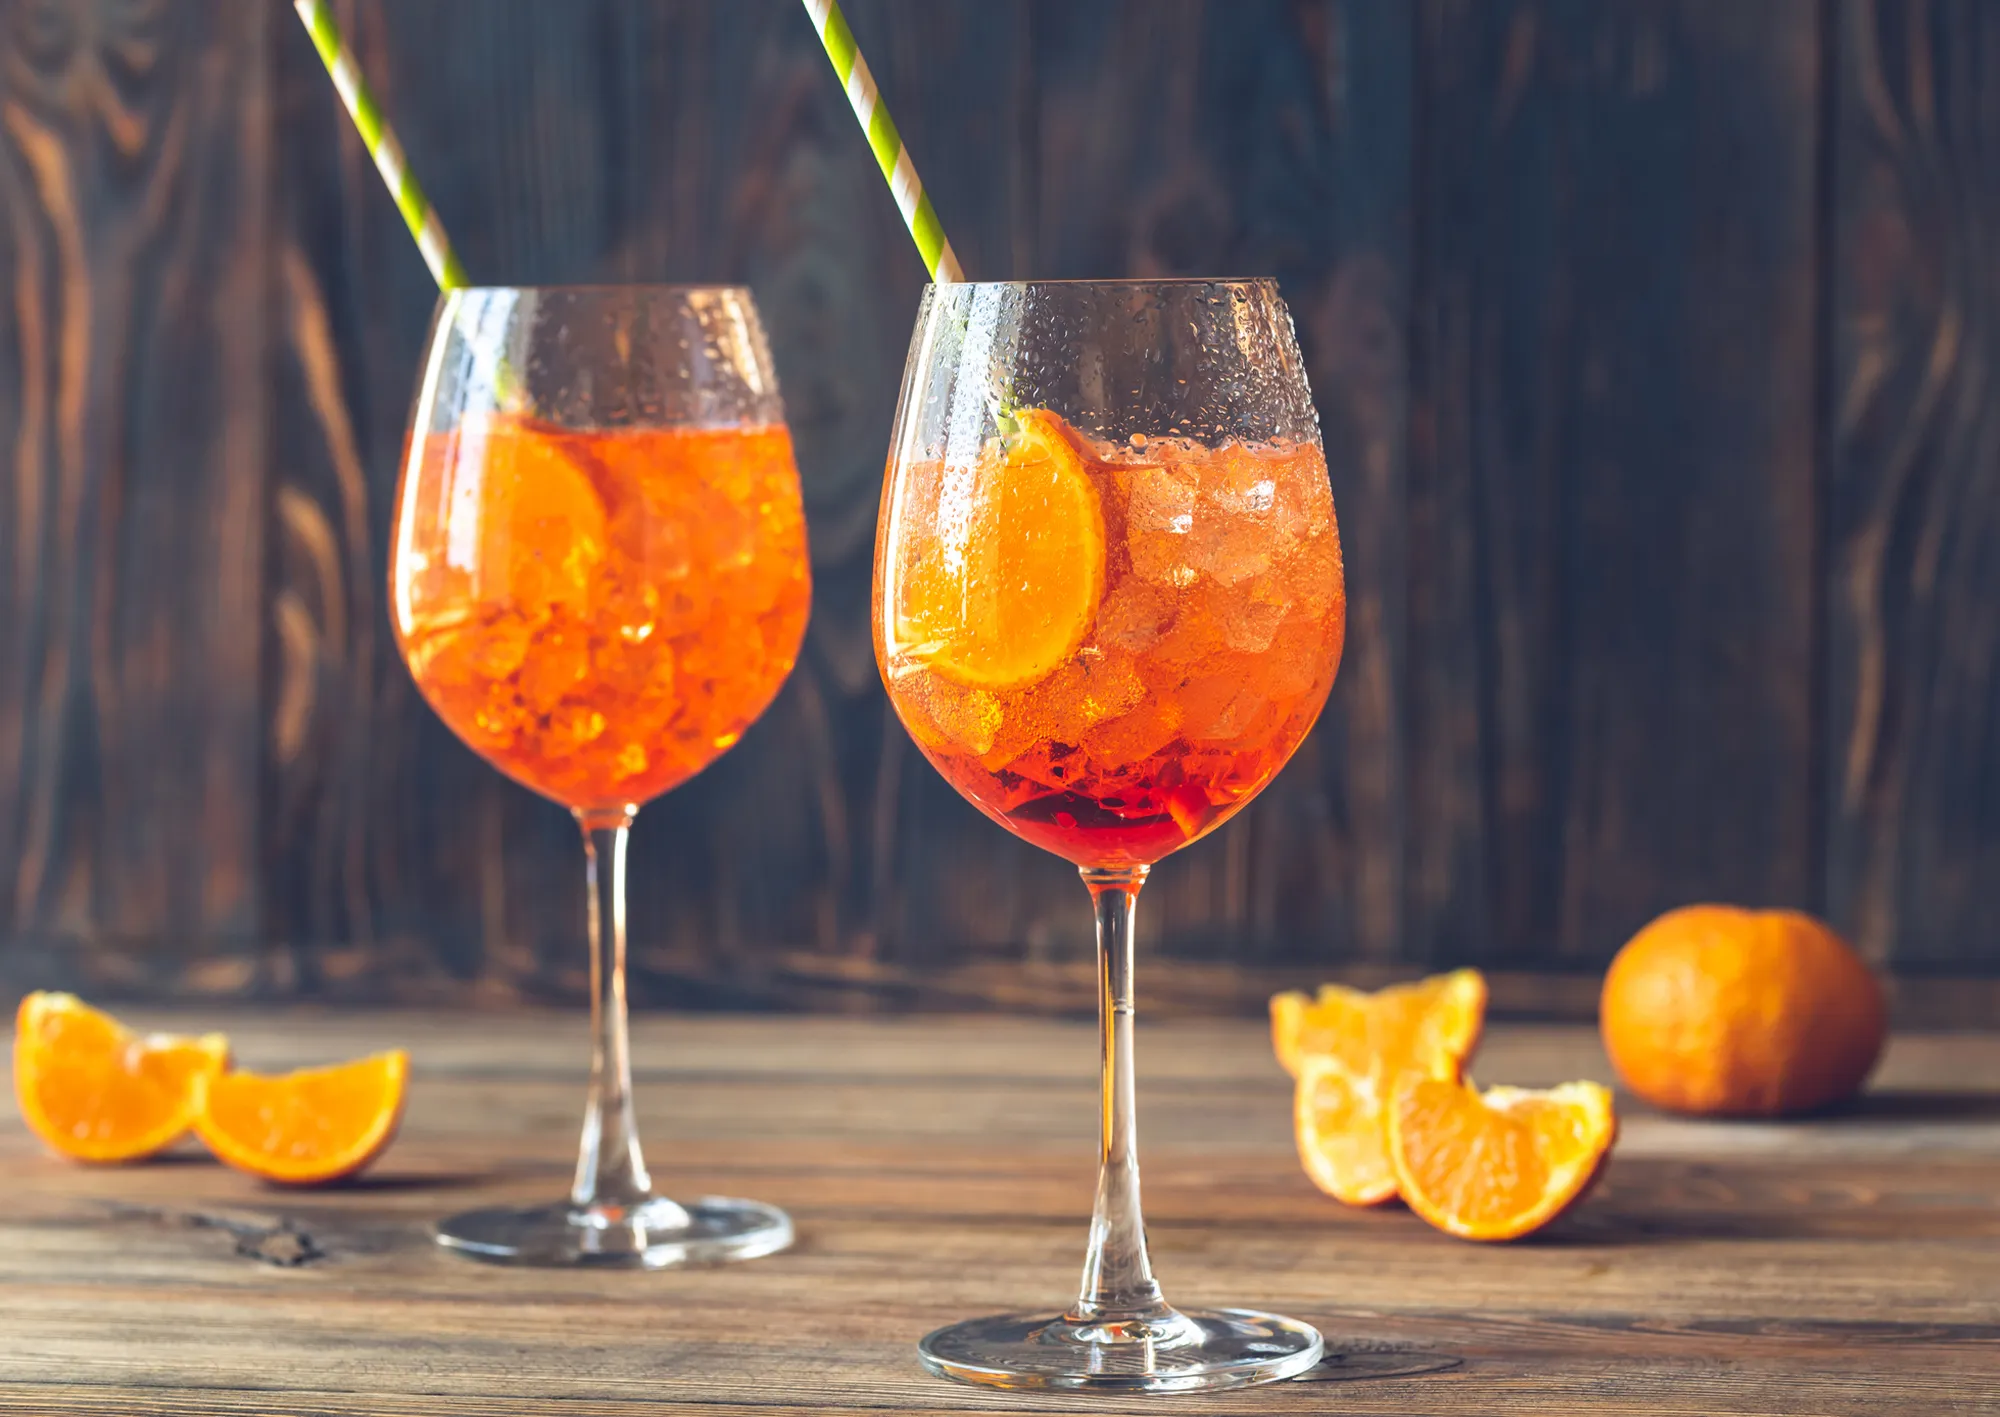 How To Make A Poorman’s Aperol Spritz photo